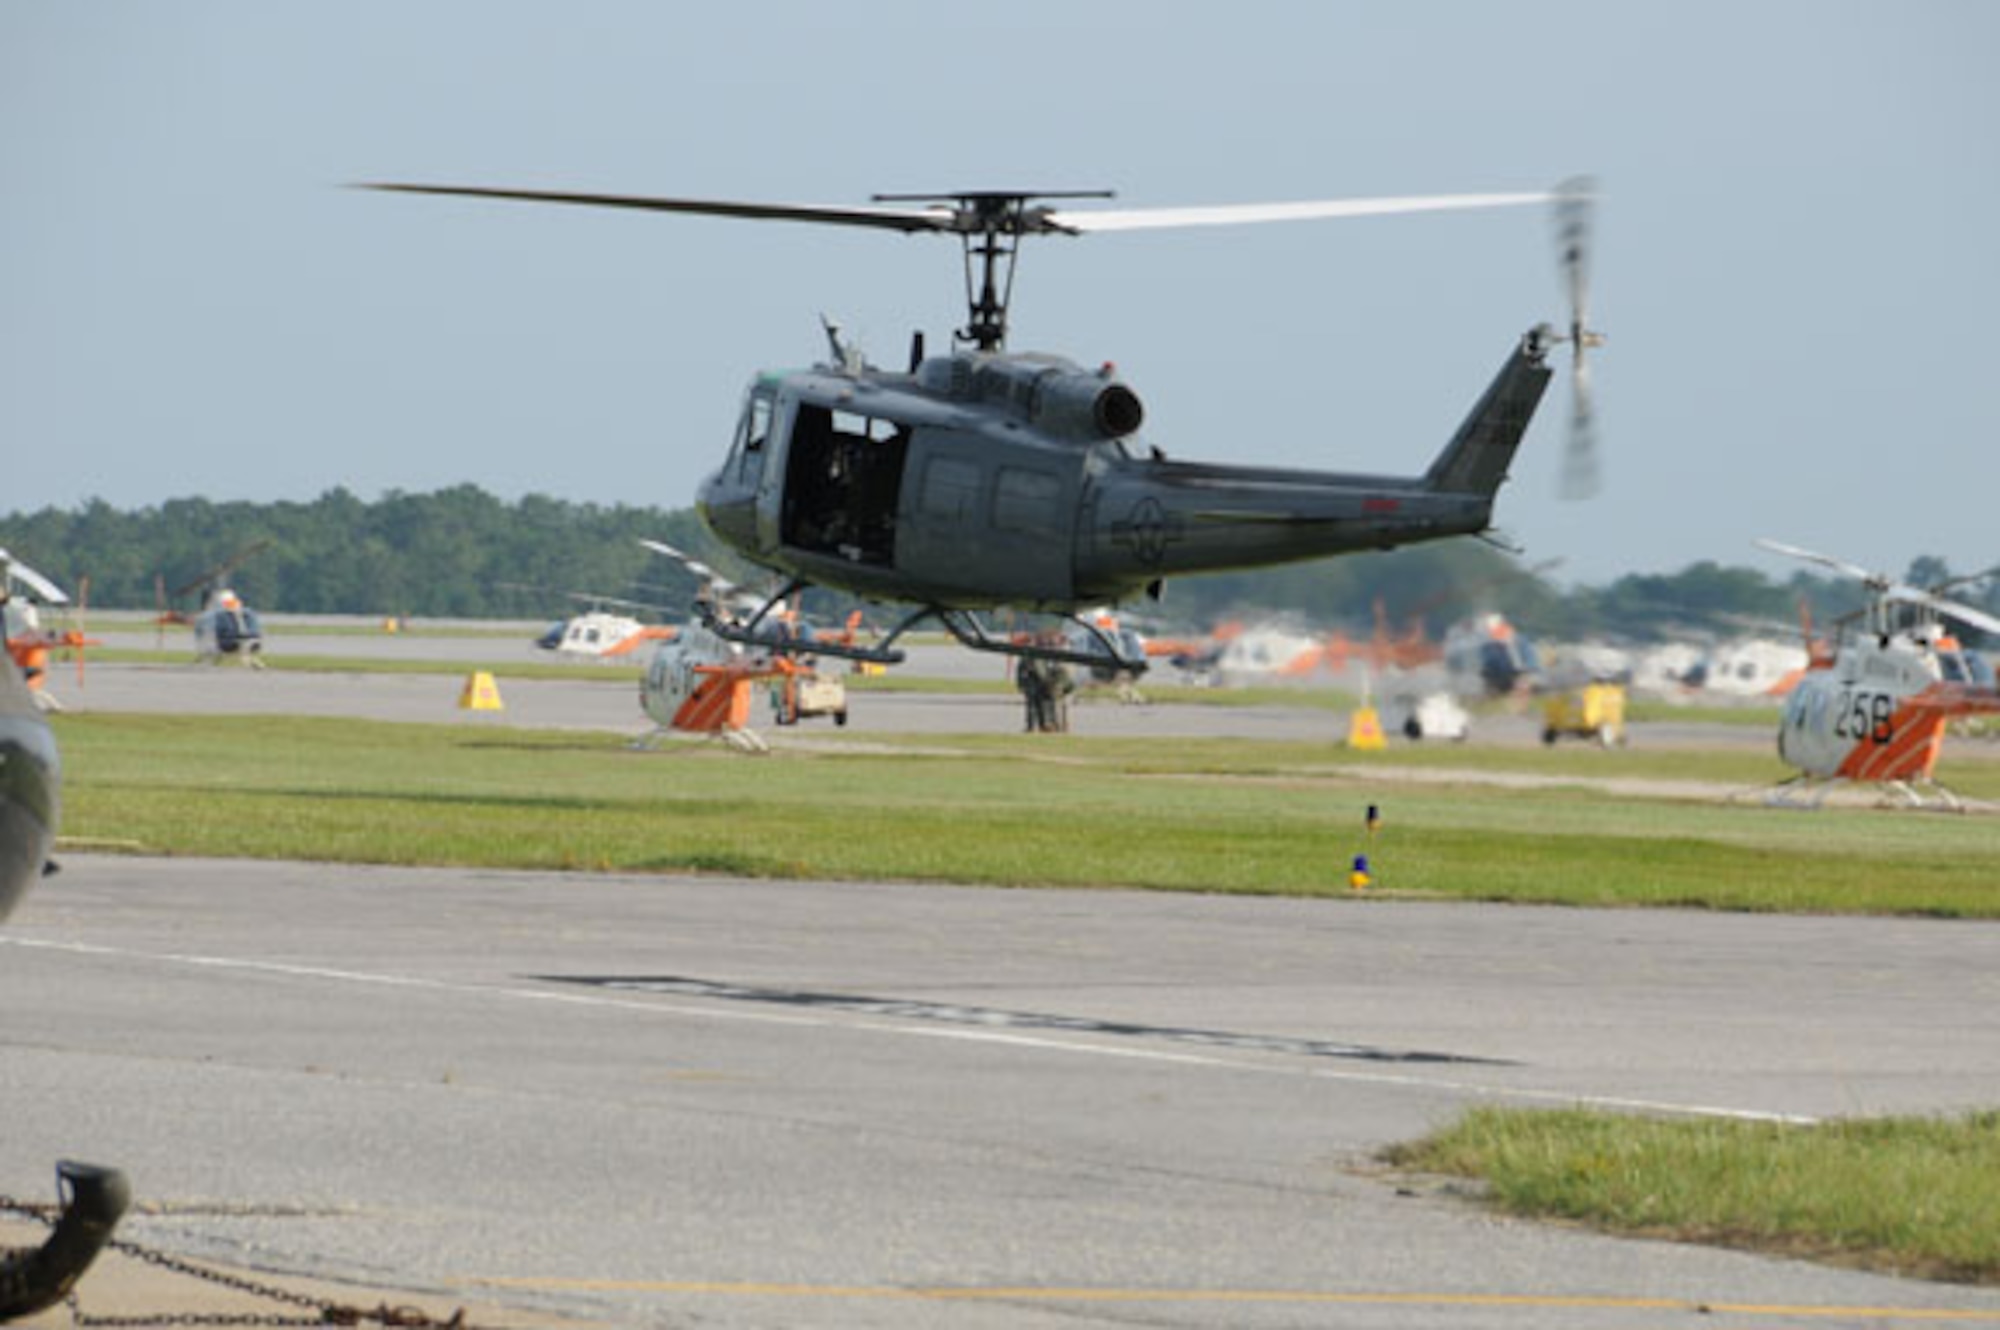 The Vietnam-era UH-1H helicopters are being converted into brand new TH-1H helicopters. The UH-1Hs are stripped down, cleaned and then built back up with brand new structural and dynamic parts, an upgraded engine and a glass cockpit that includes state of the art avionics. Courtesy photo